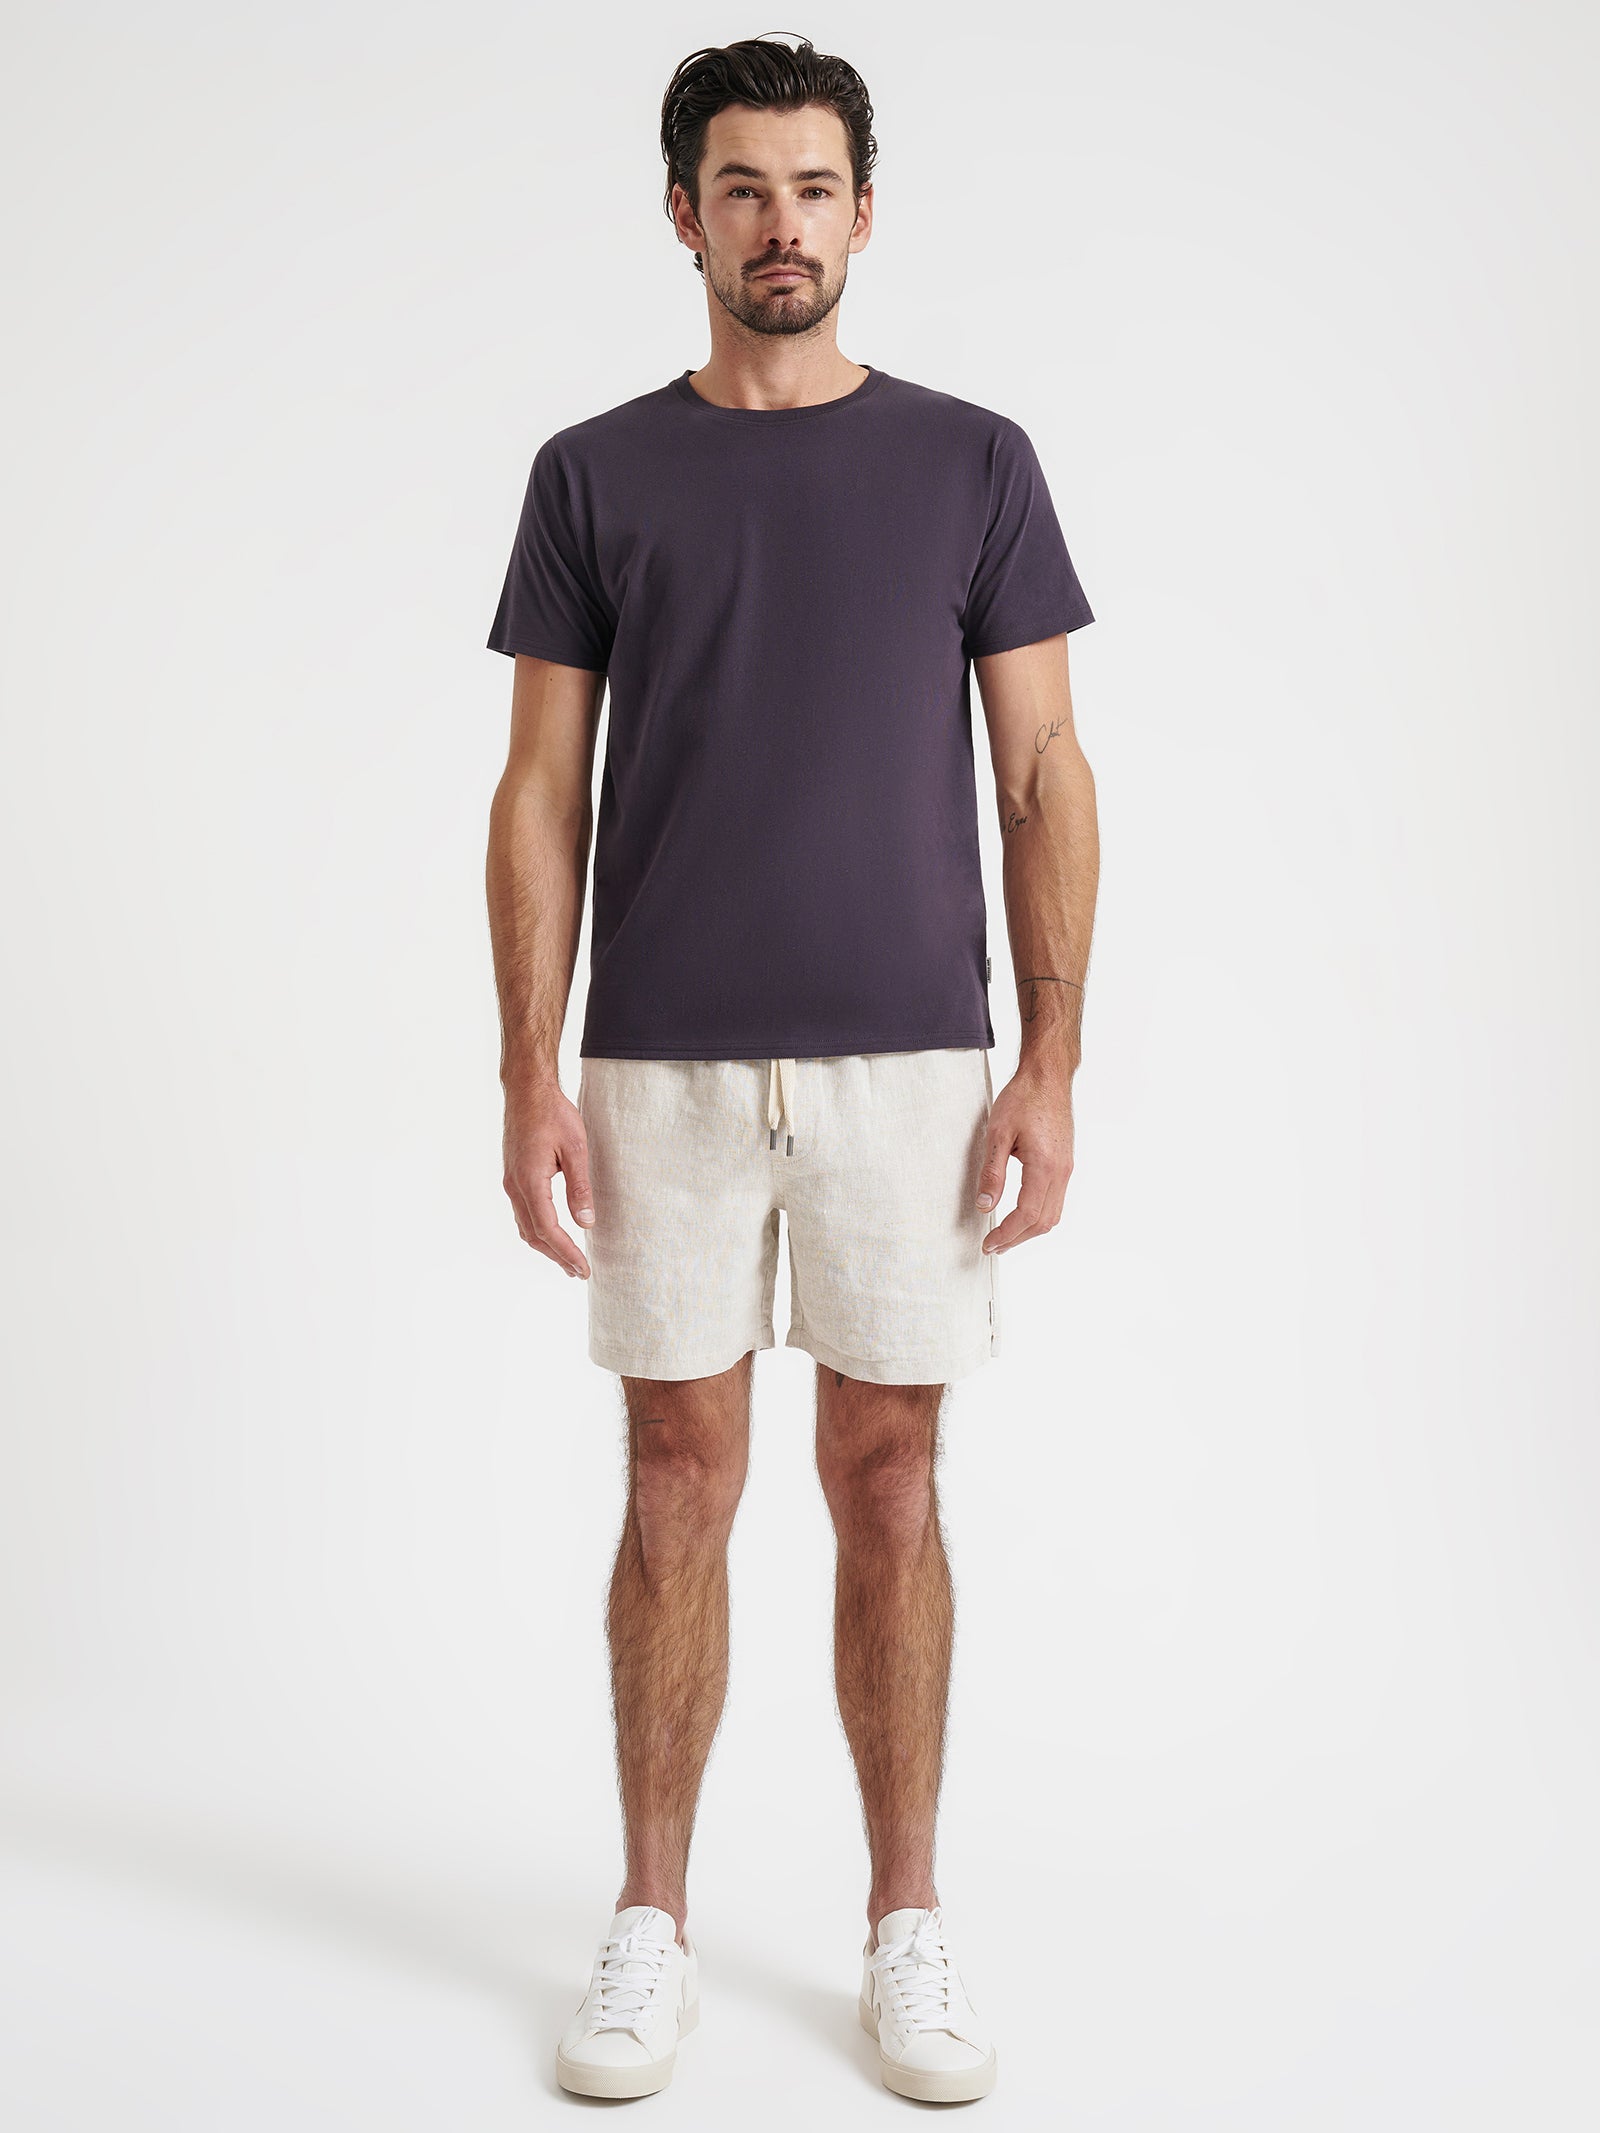 Nero Linen Shorts in Natural